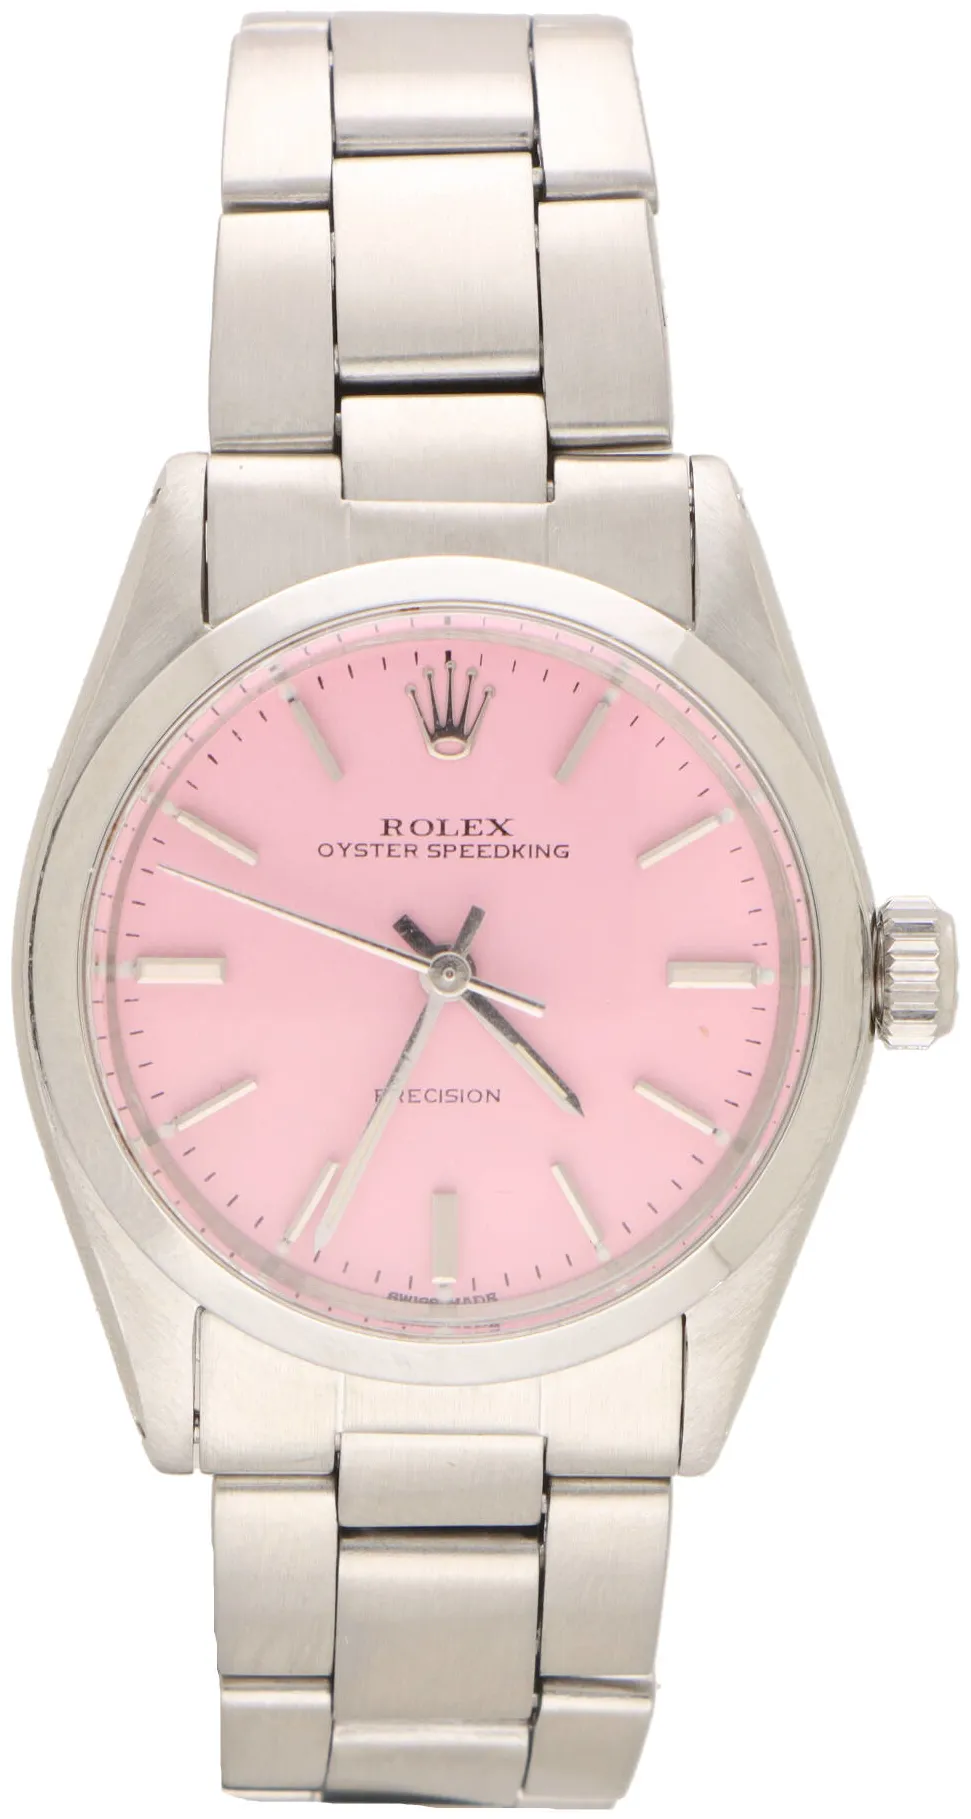 Rolex Oyster Speedking 6420 31mm Stainless steel Rose